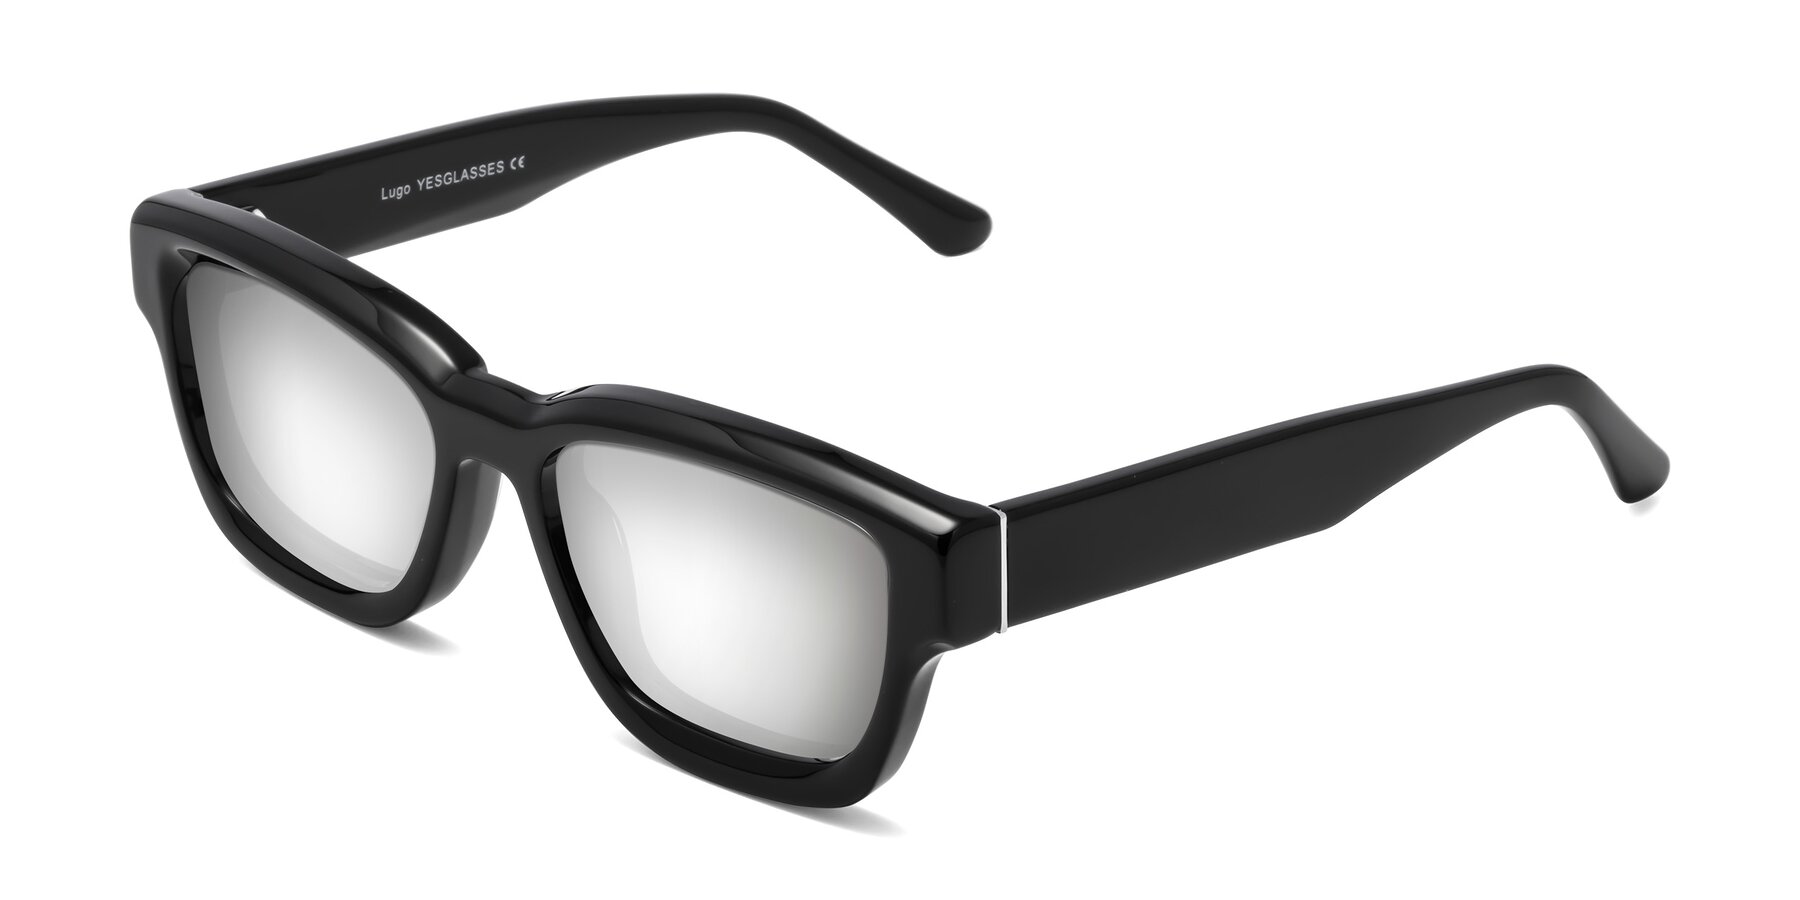 Angle of Lugo in Black with Silver Mirrored Lenses